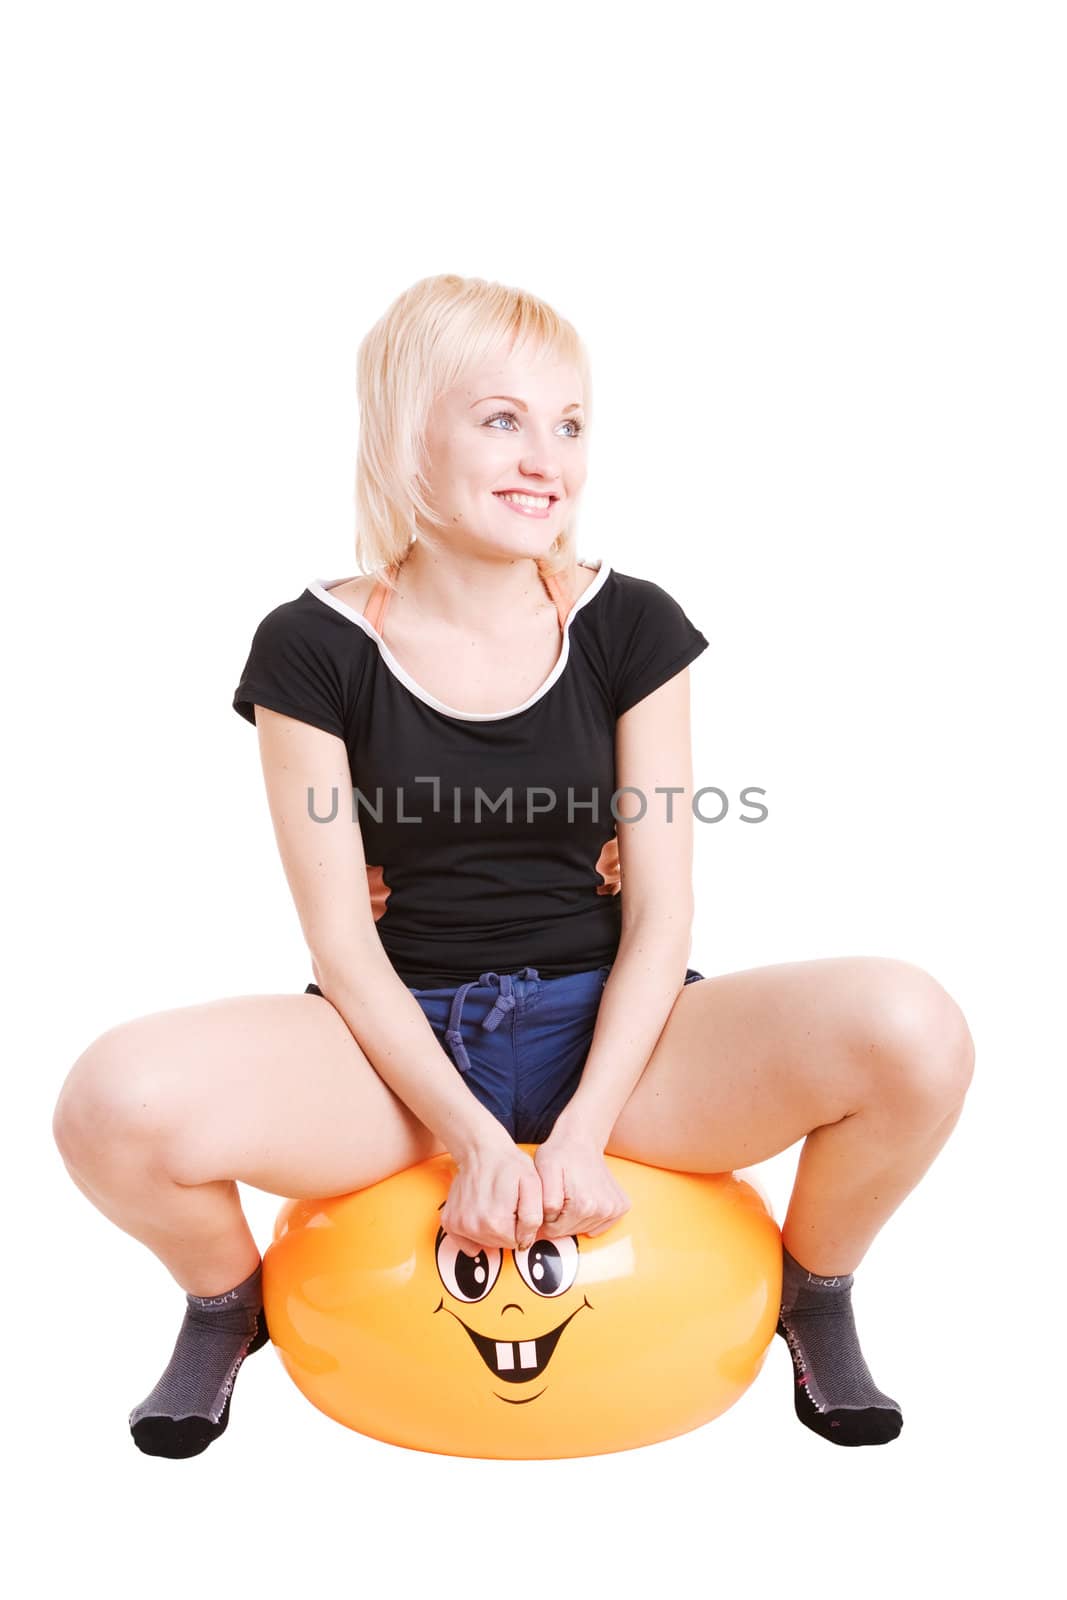 a smiling young woman going in for fitness sits on a big ball by vsurkov